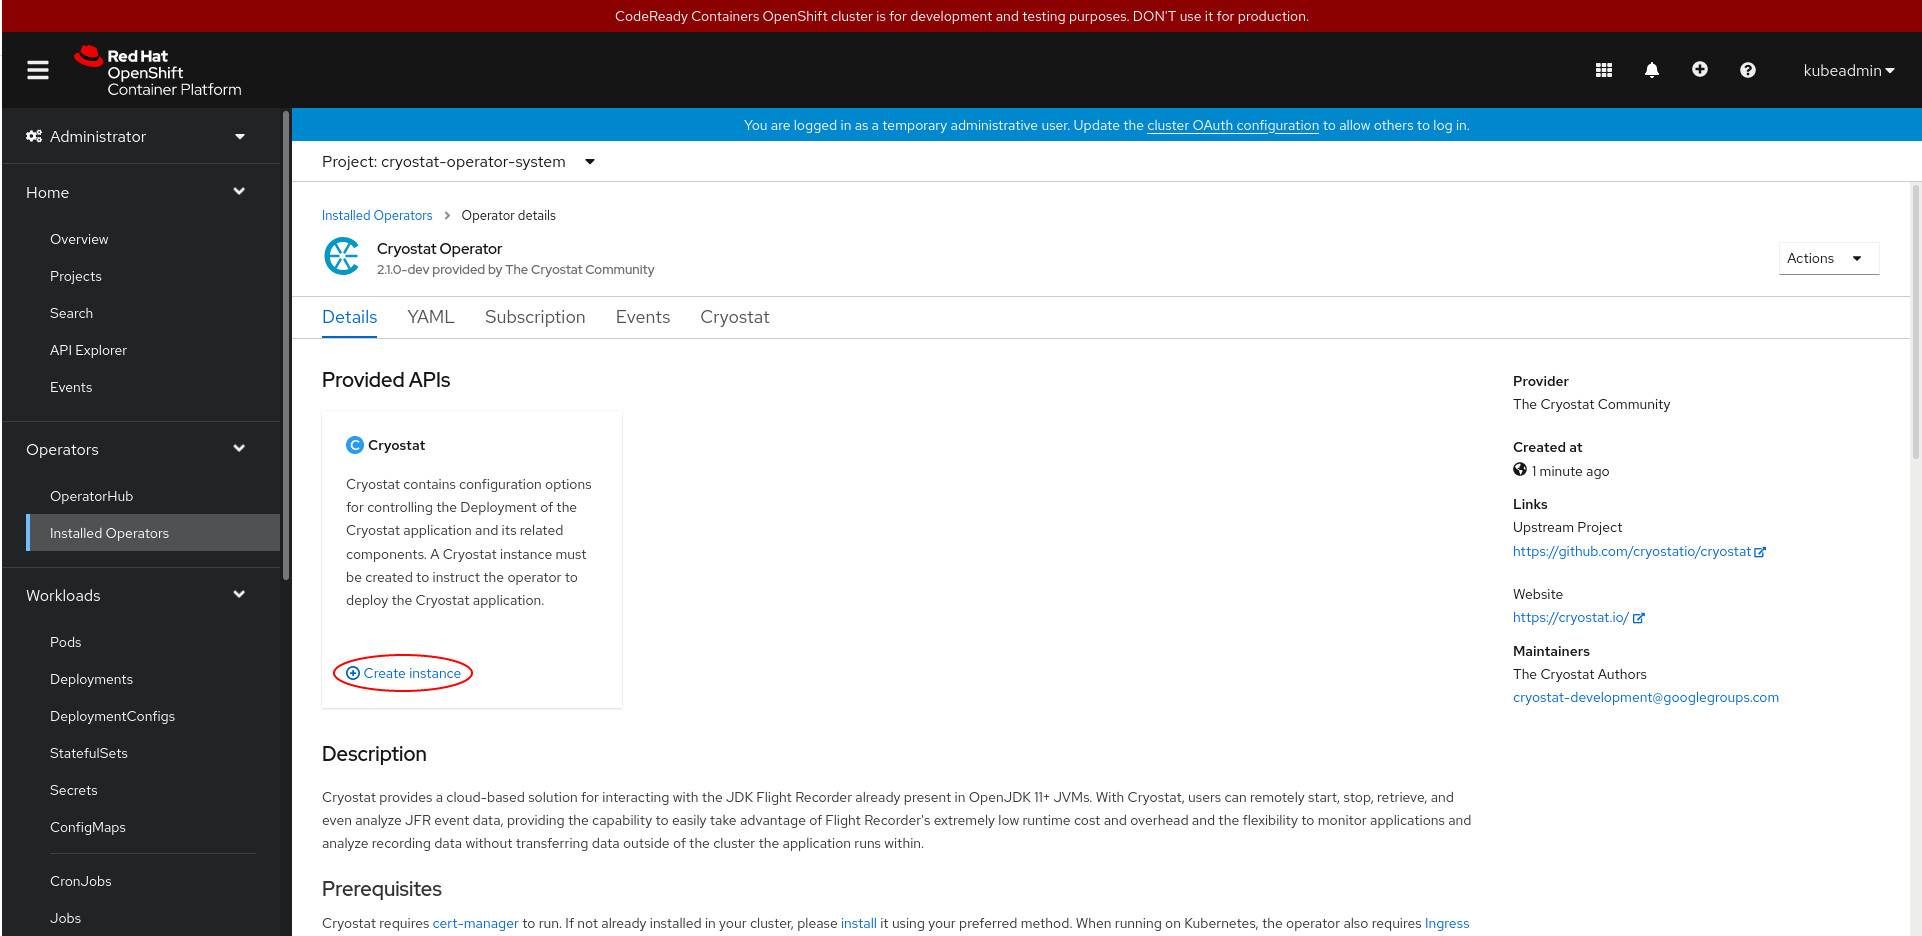 The Cryostat Operator page under Installed Operators on the Openshift web console, with Create instance highlighted.